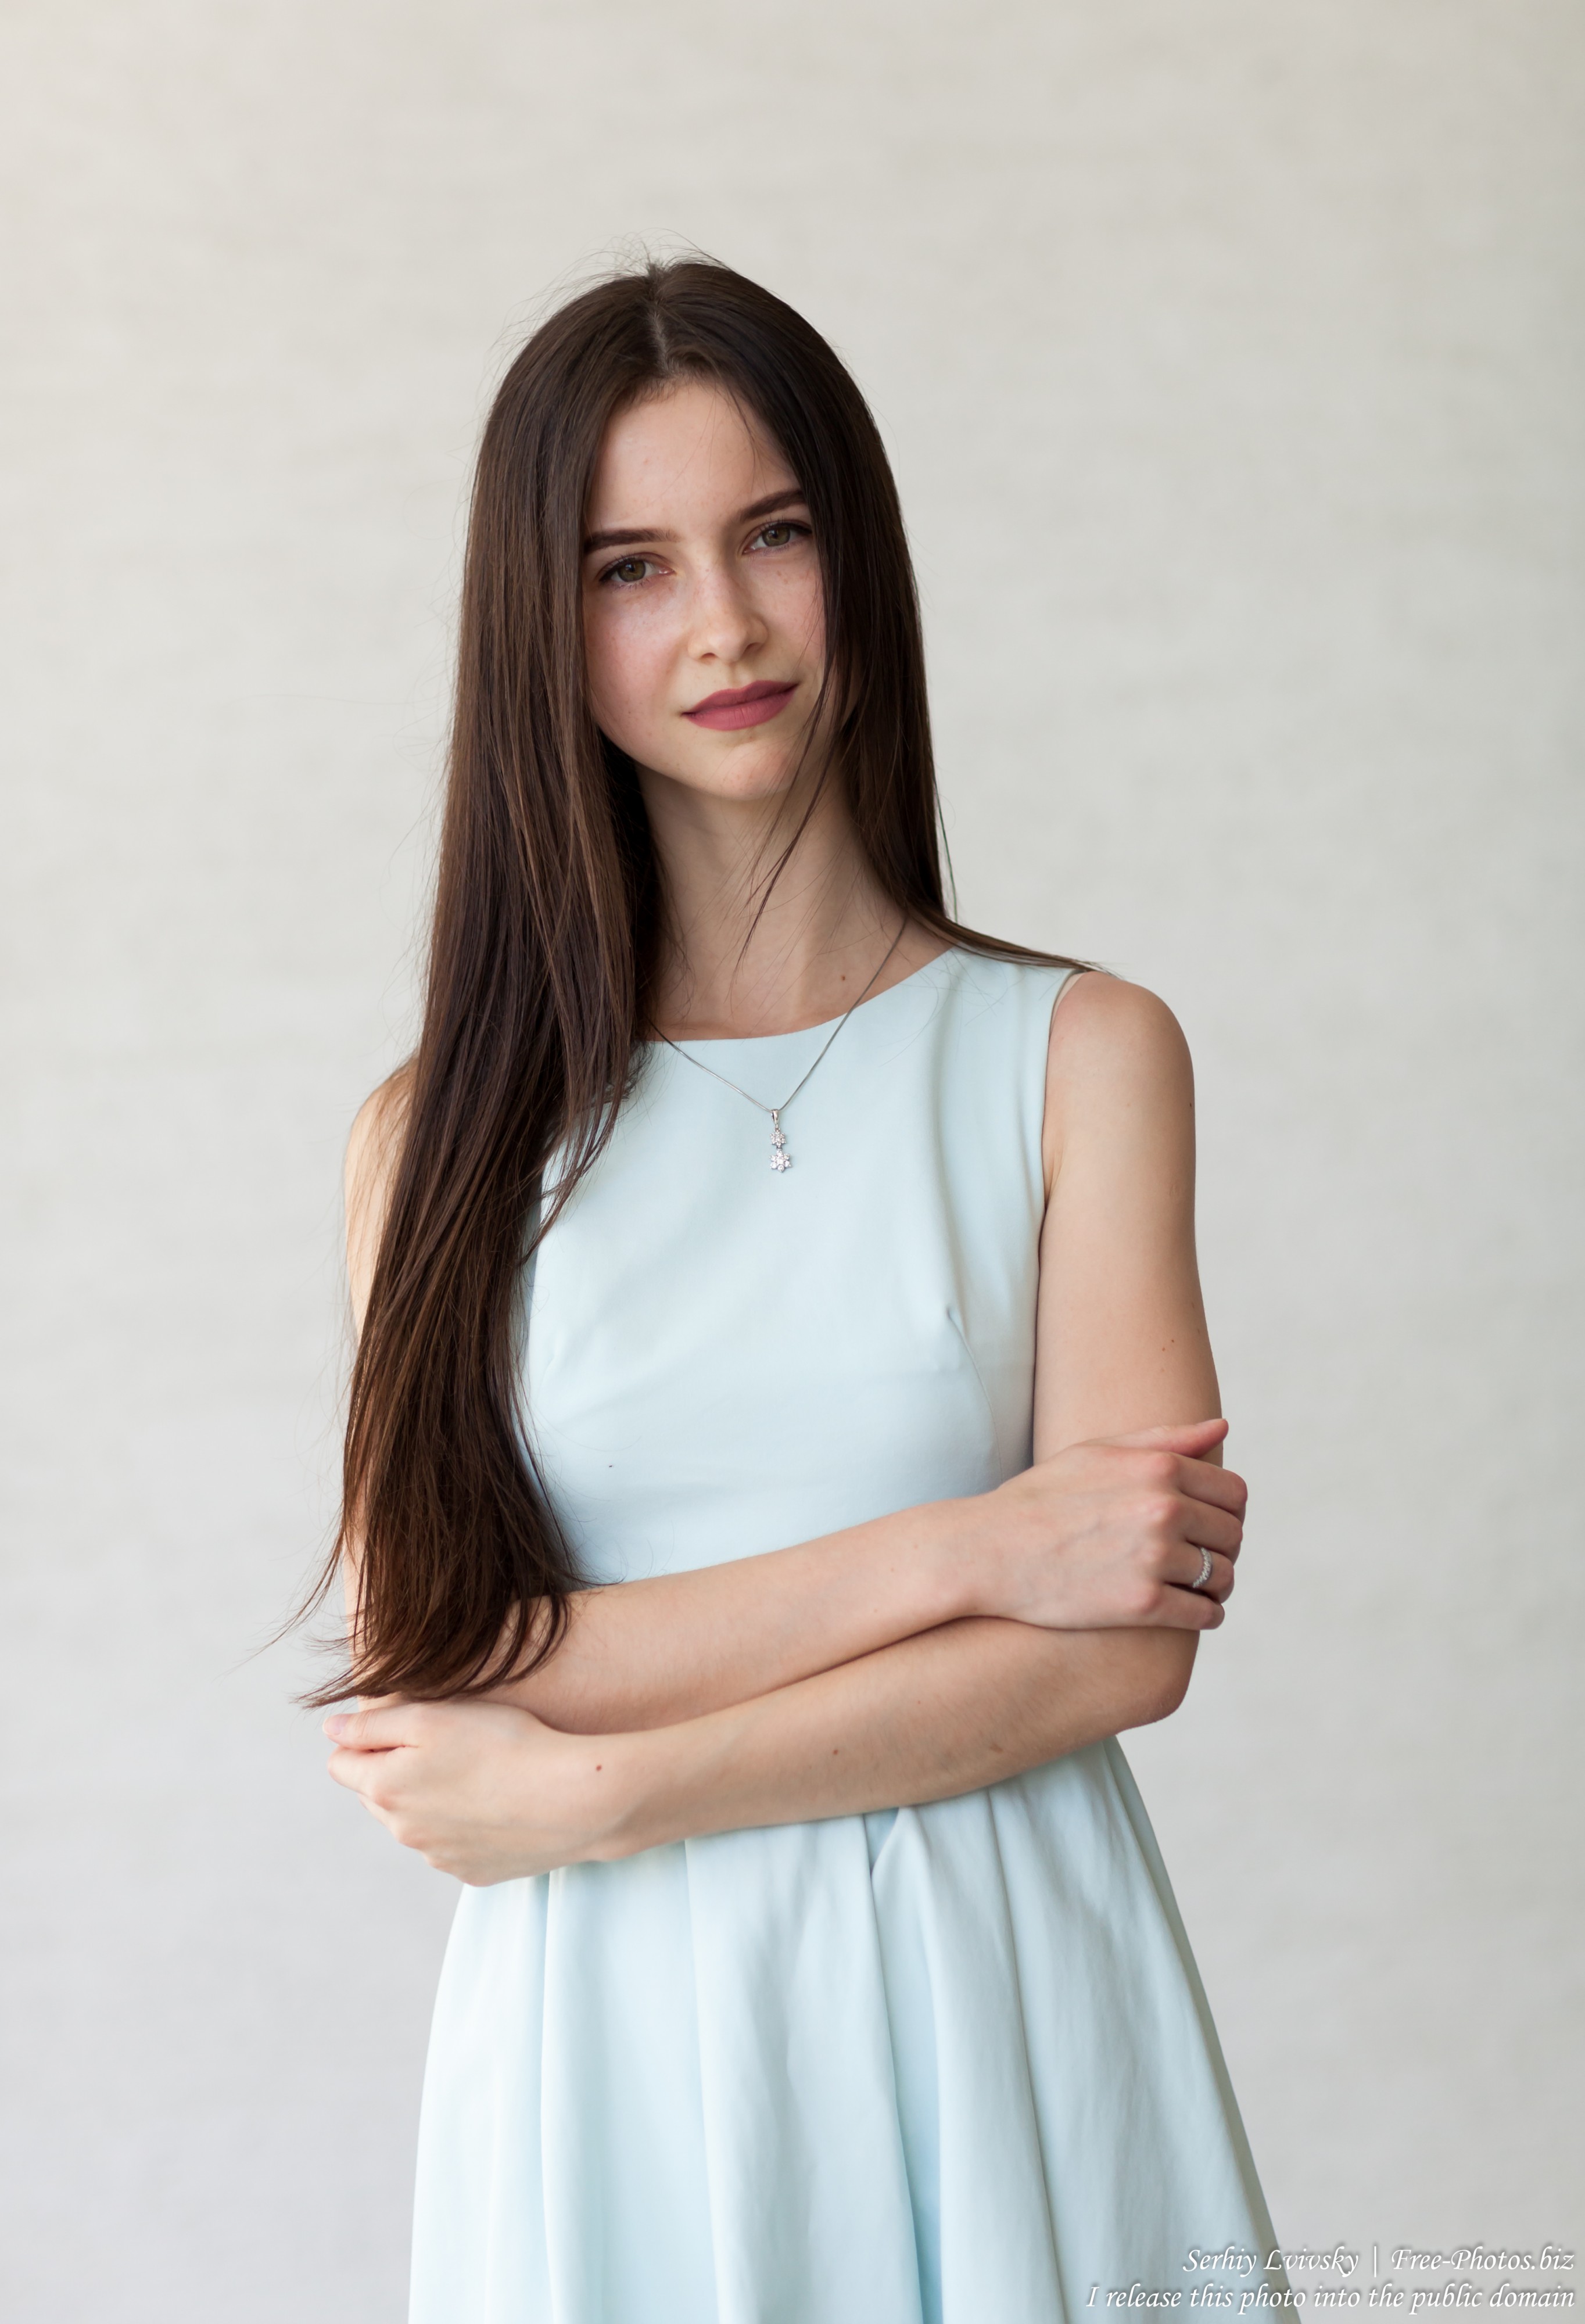 Photo Of Vika A 25 Year Old Brunette Woman Photographed By Serhiy Lvivsky In July 2018 Picture 1